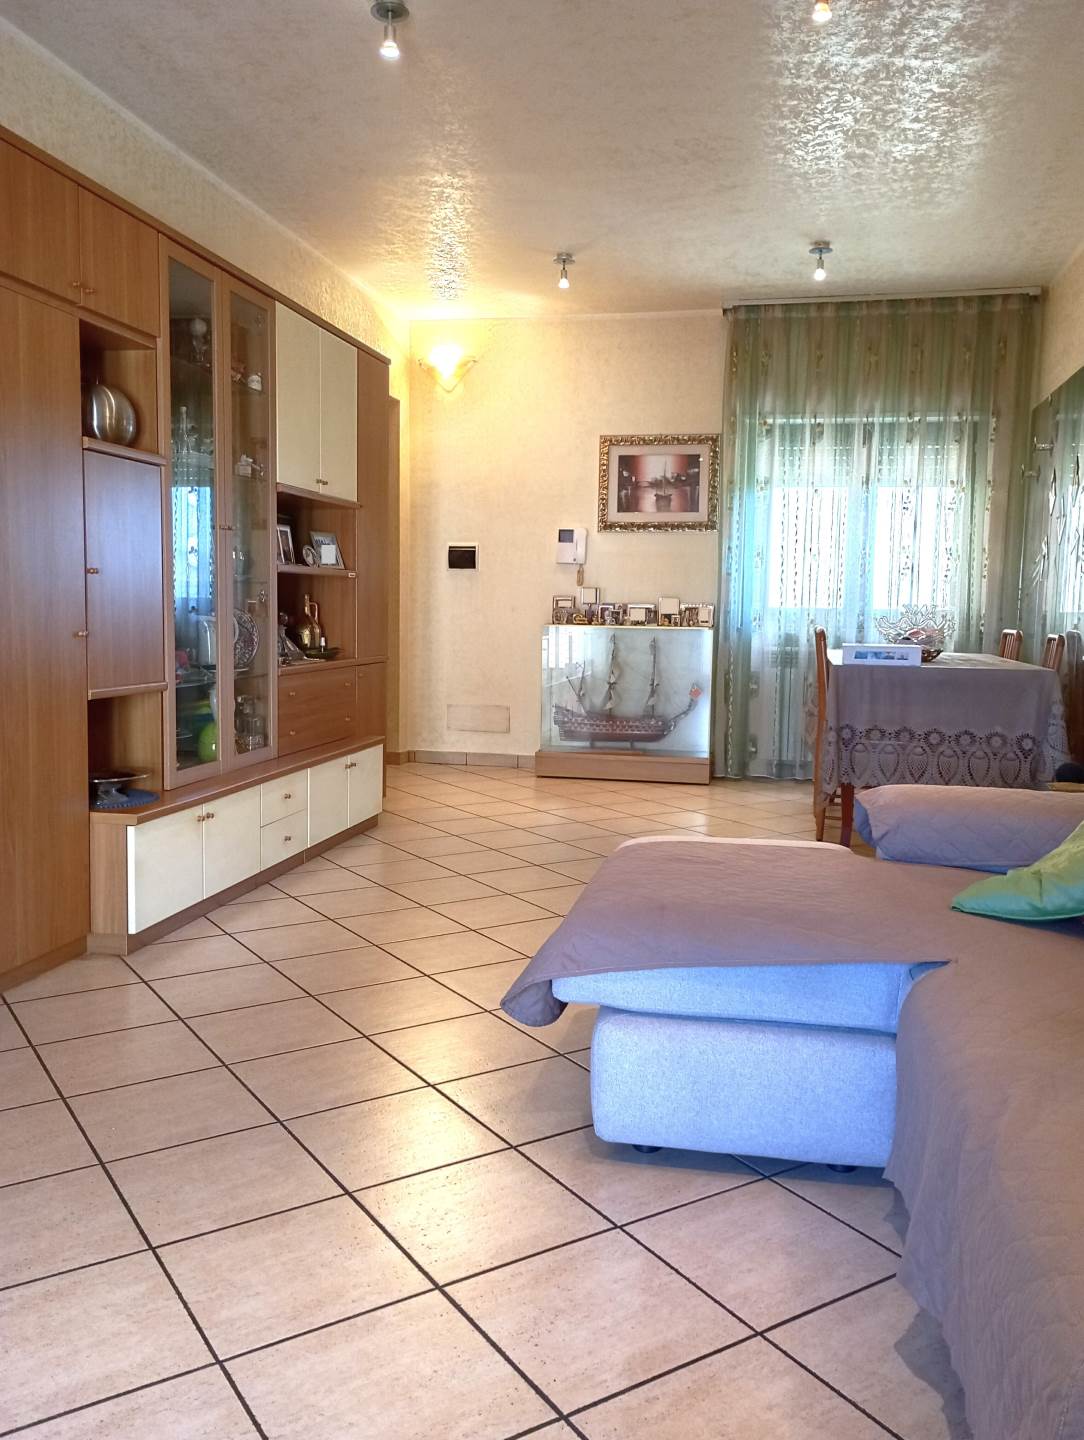 STAZIONE DI MONTALTO, MONTALTO UFFUGO, Apartment for sale of 118 Sq. mt., Excellent Condition, Heating Individual heating system, Energetic class: G, 